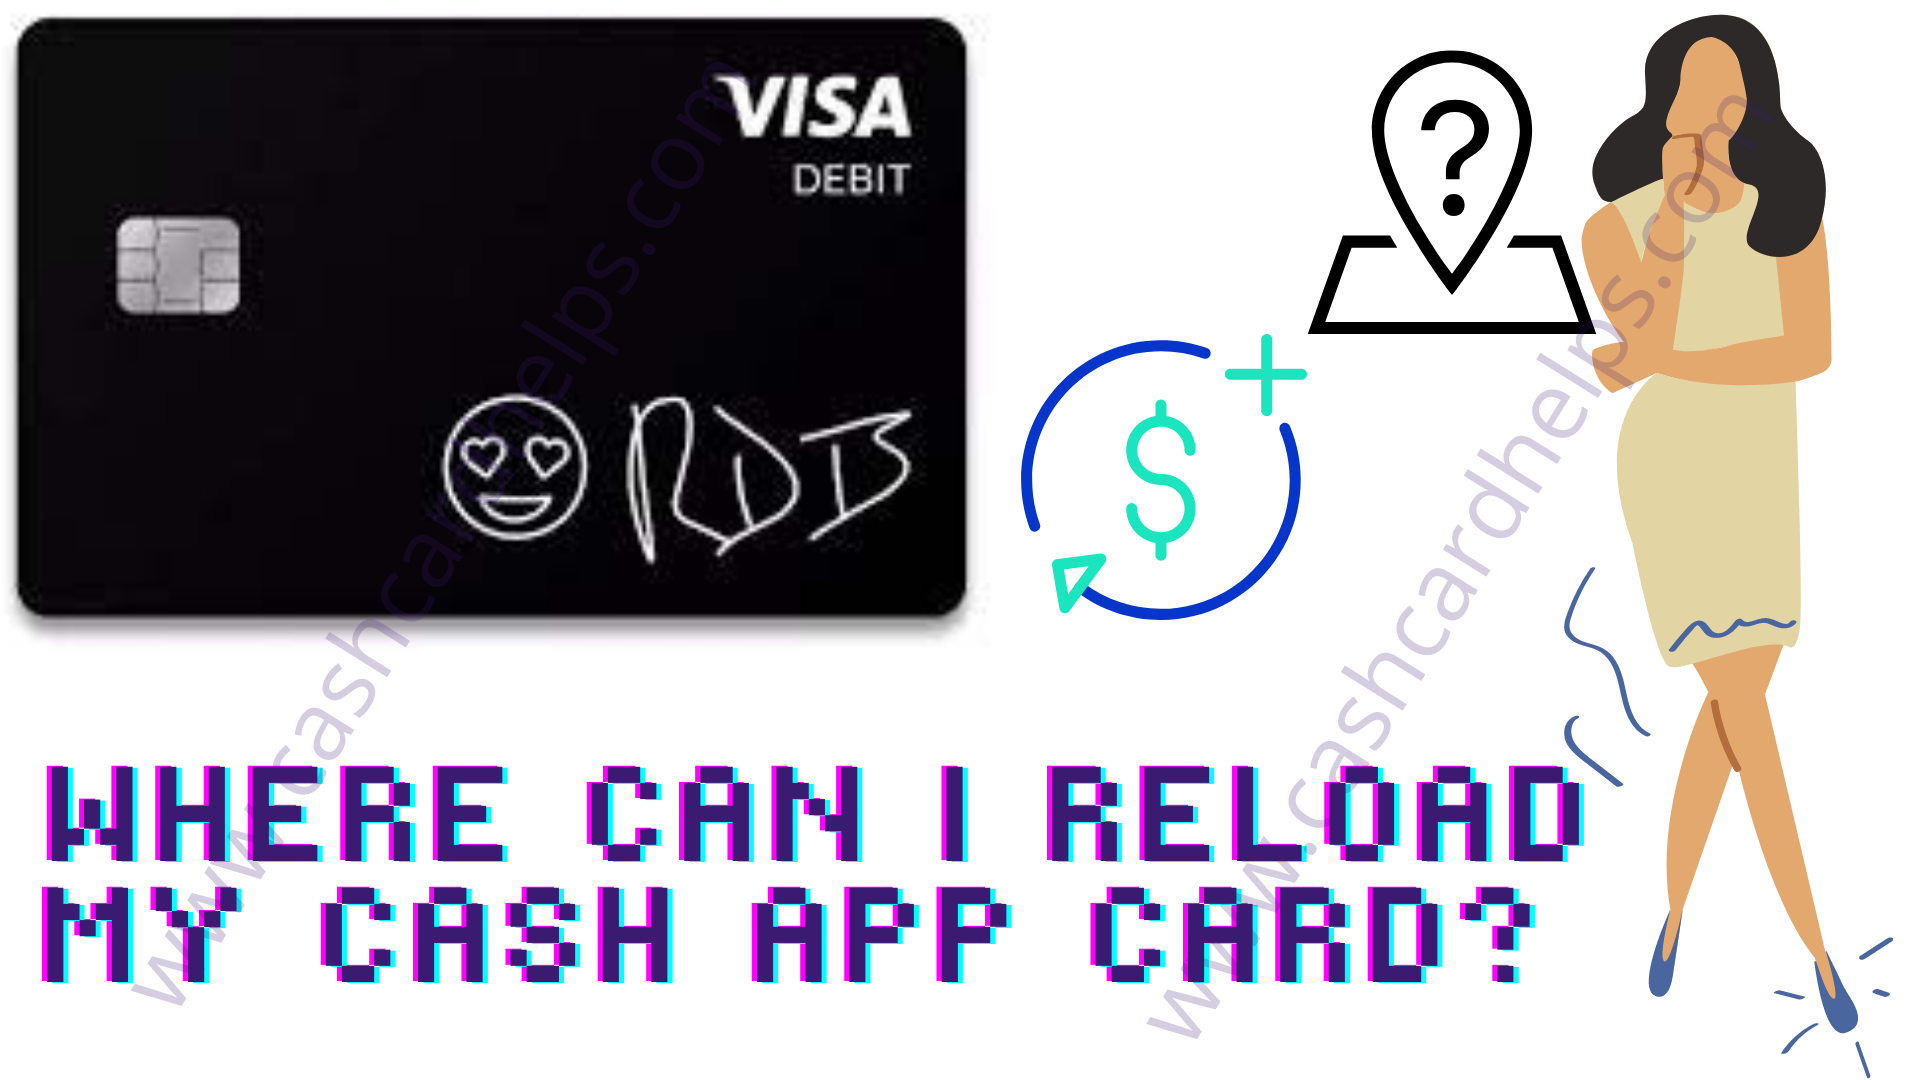 Where Can I Reload My Cash App Card